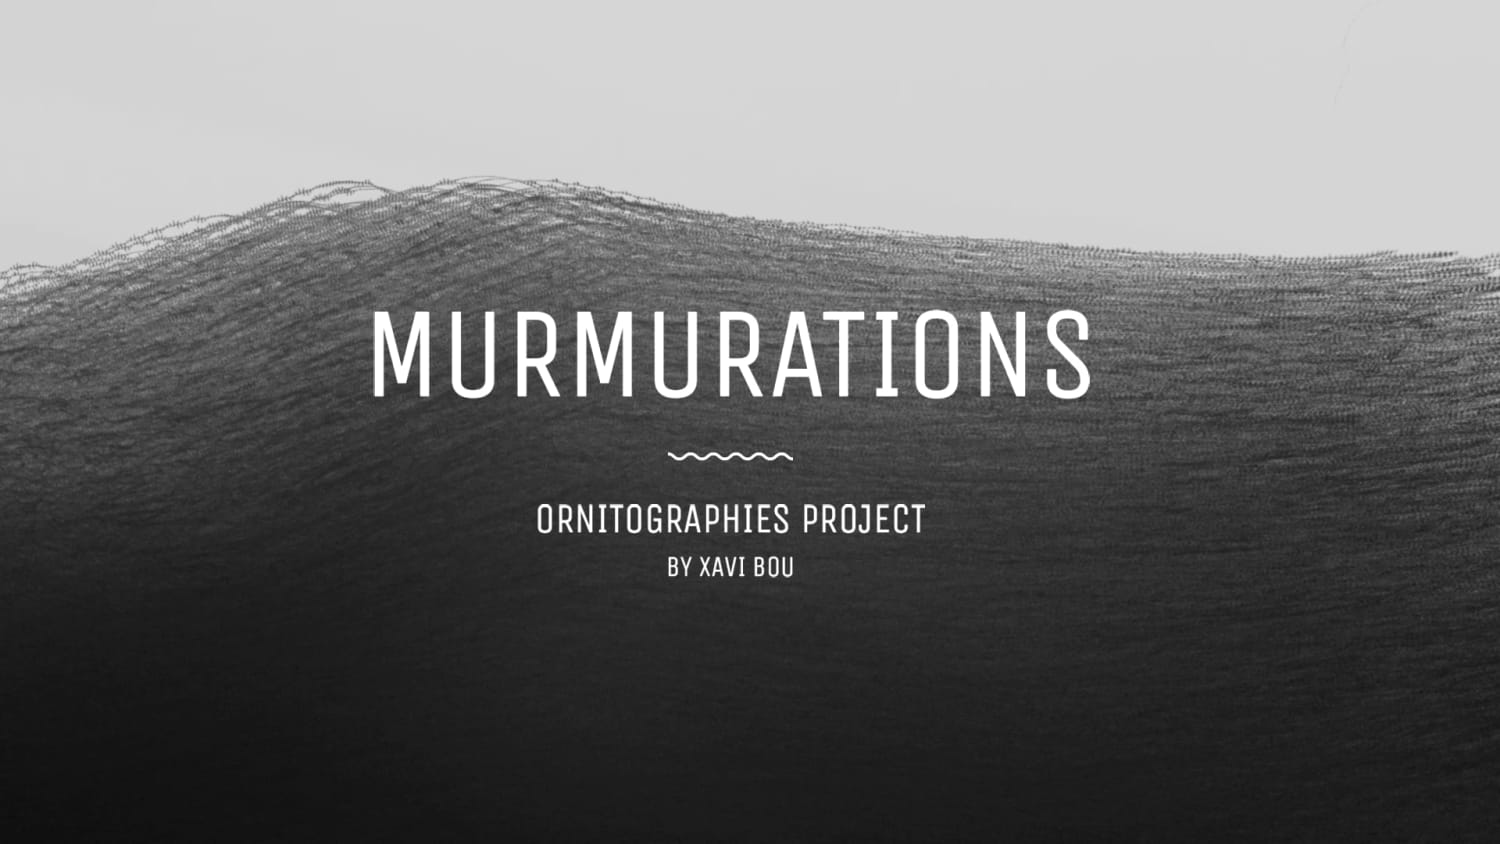 Murmurations; Ornitographies project